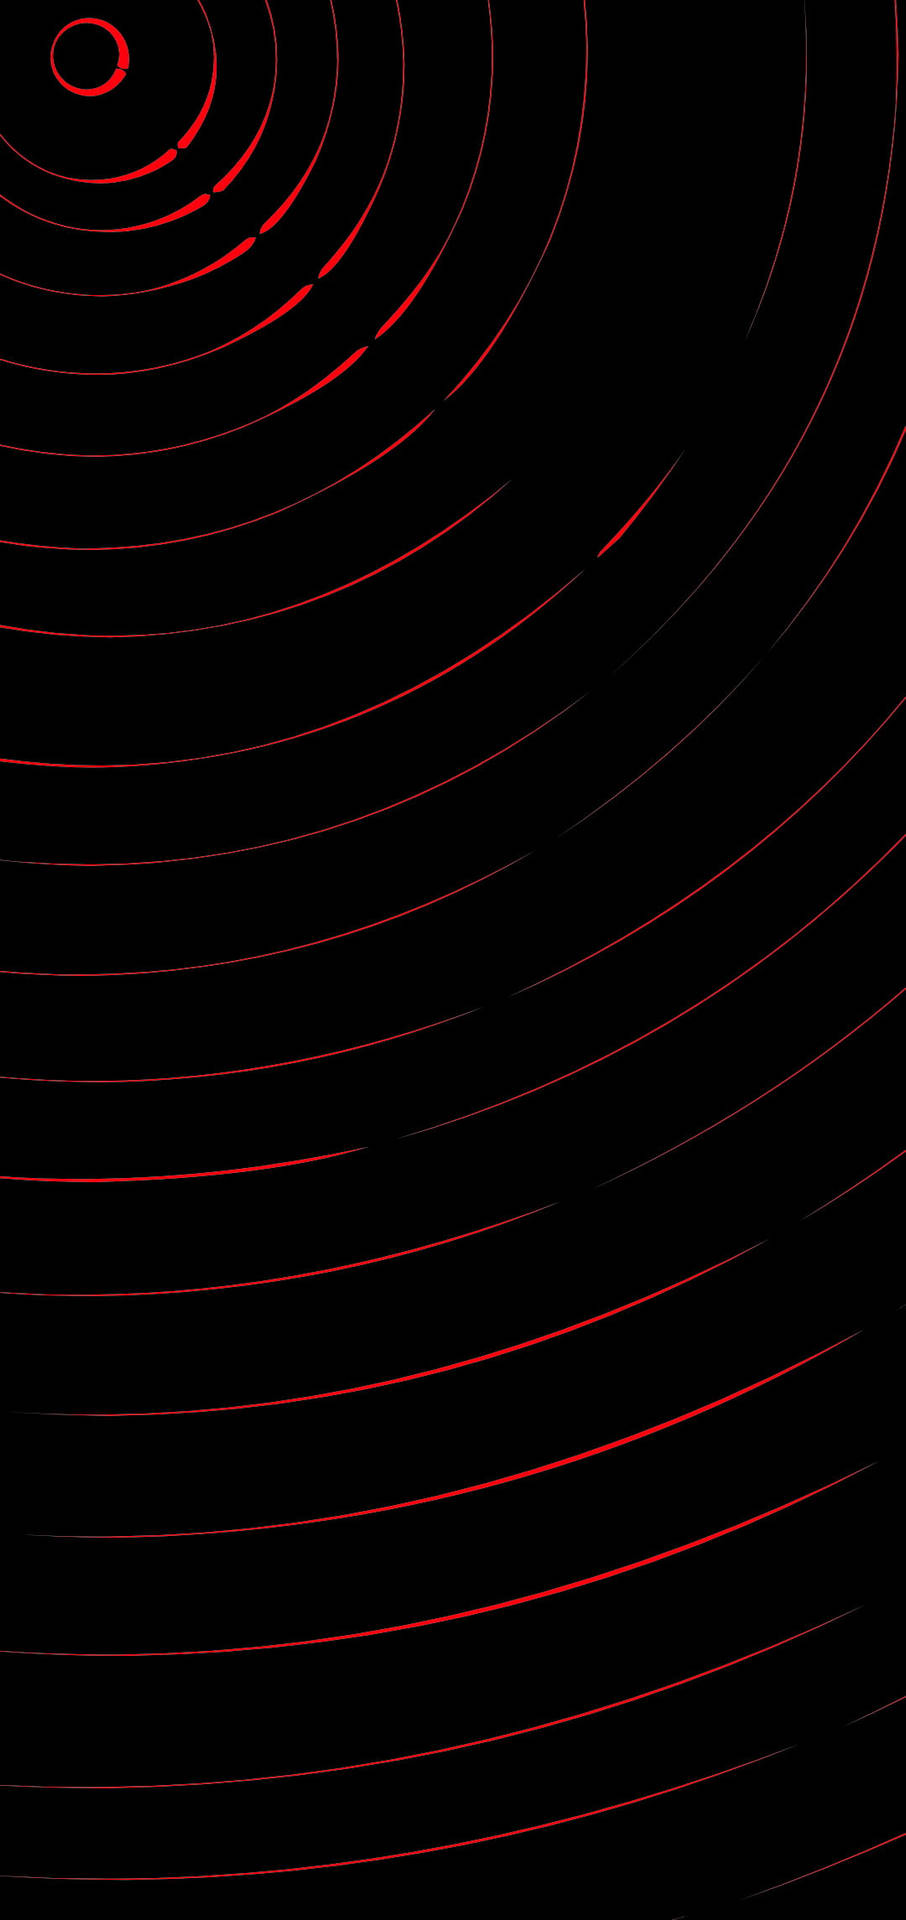 Circular Red Lines Punch Hole 4K Wallpaper